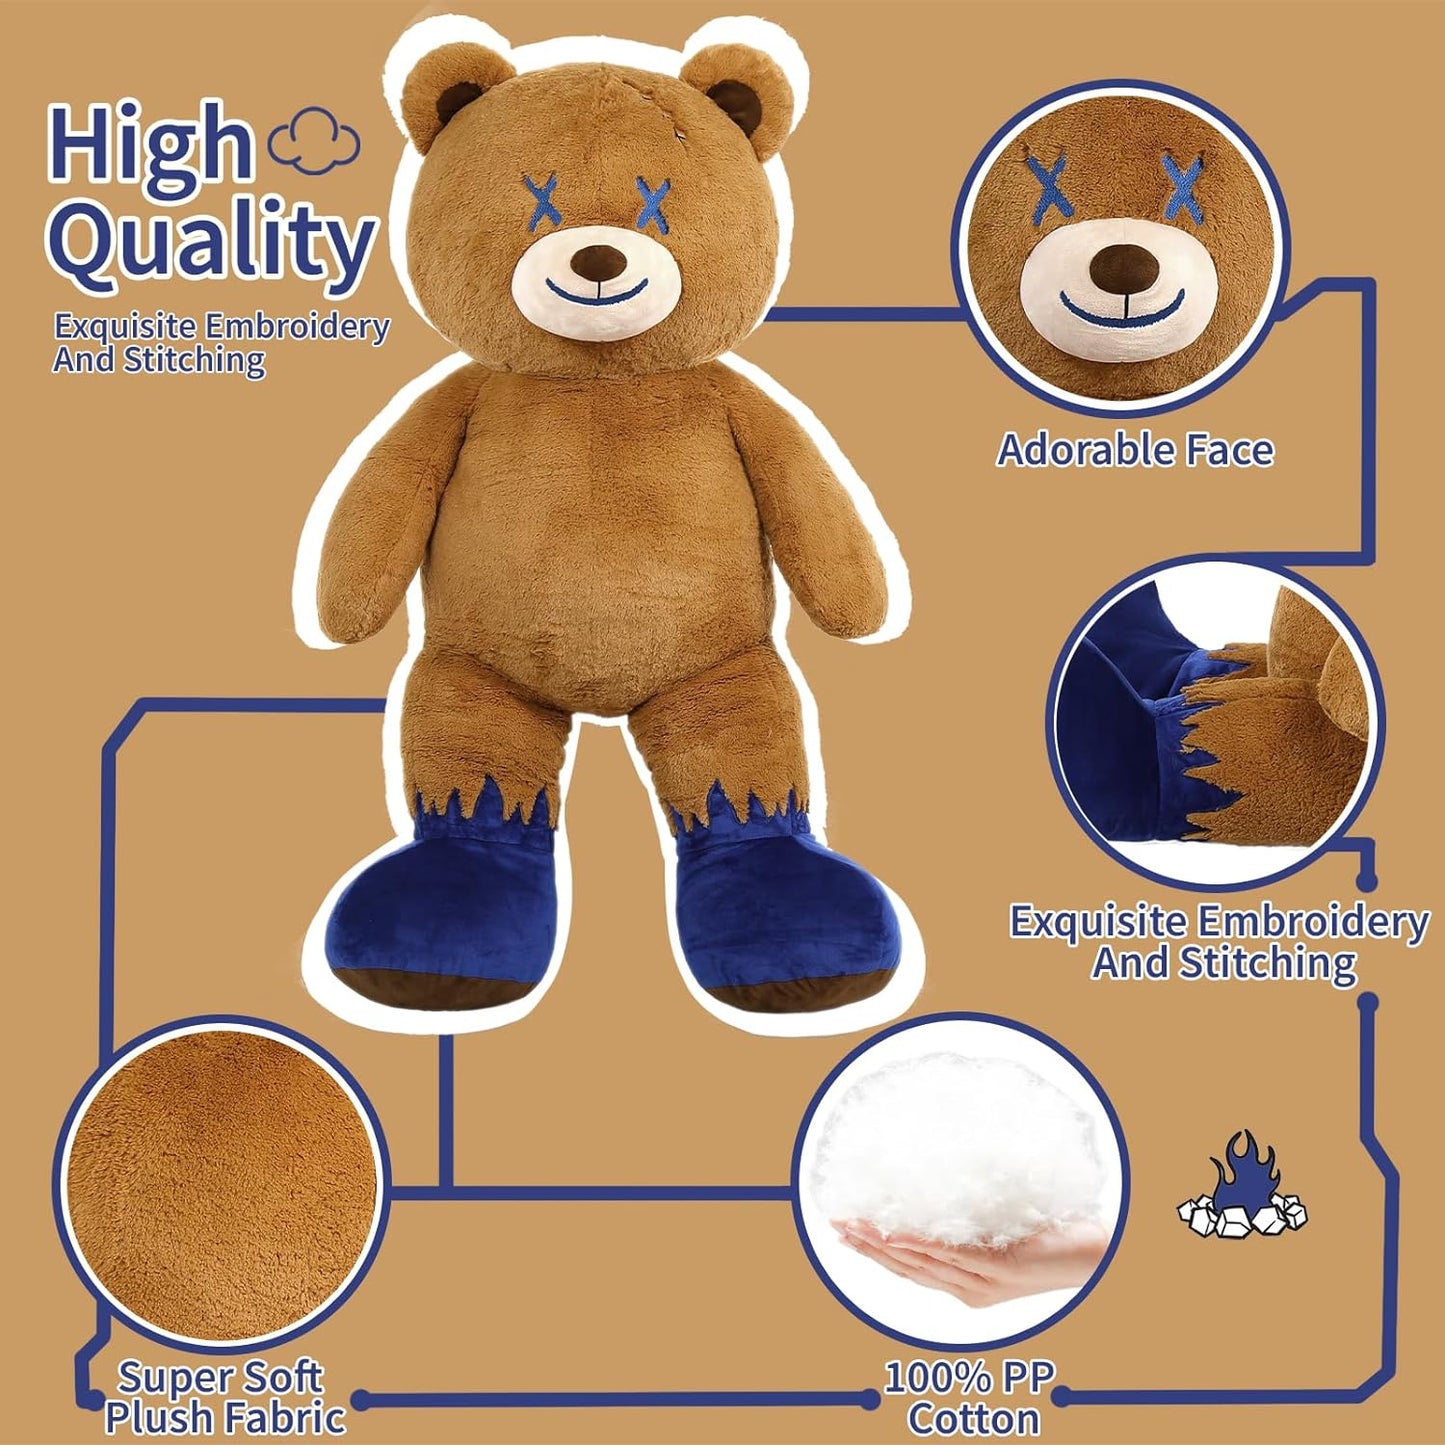 Giant Teddy Bear Plush Toy, Brown, 47 Inches